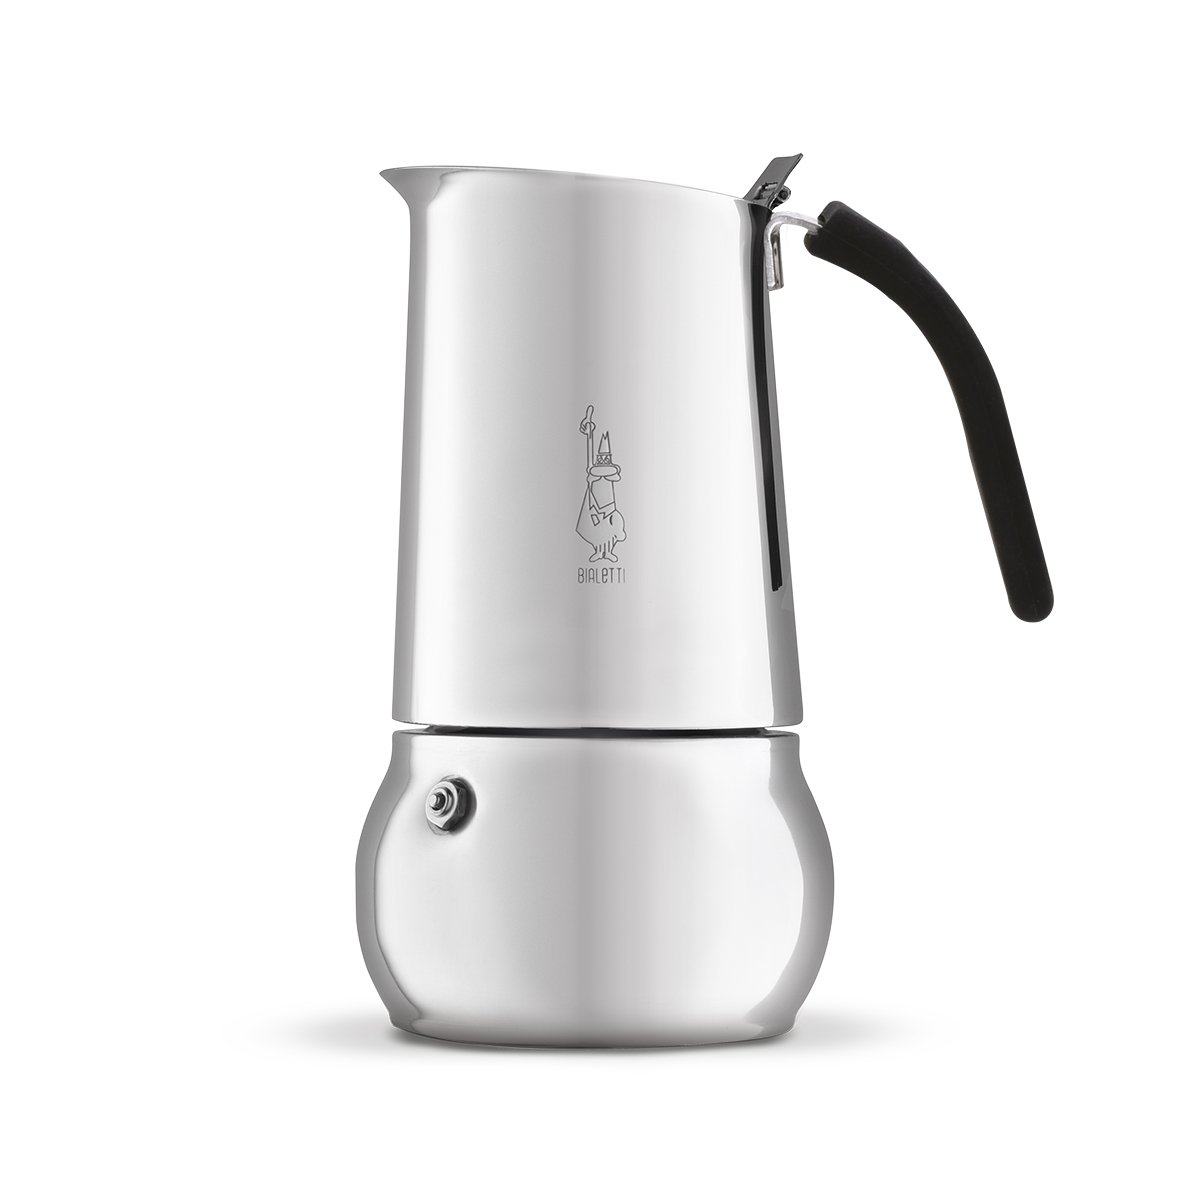 Bialetti Class Induktion Espresso Maker for 4 Cups Stainless Steel 30 x 20 x 15 cm Silver